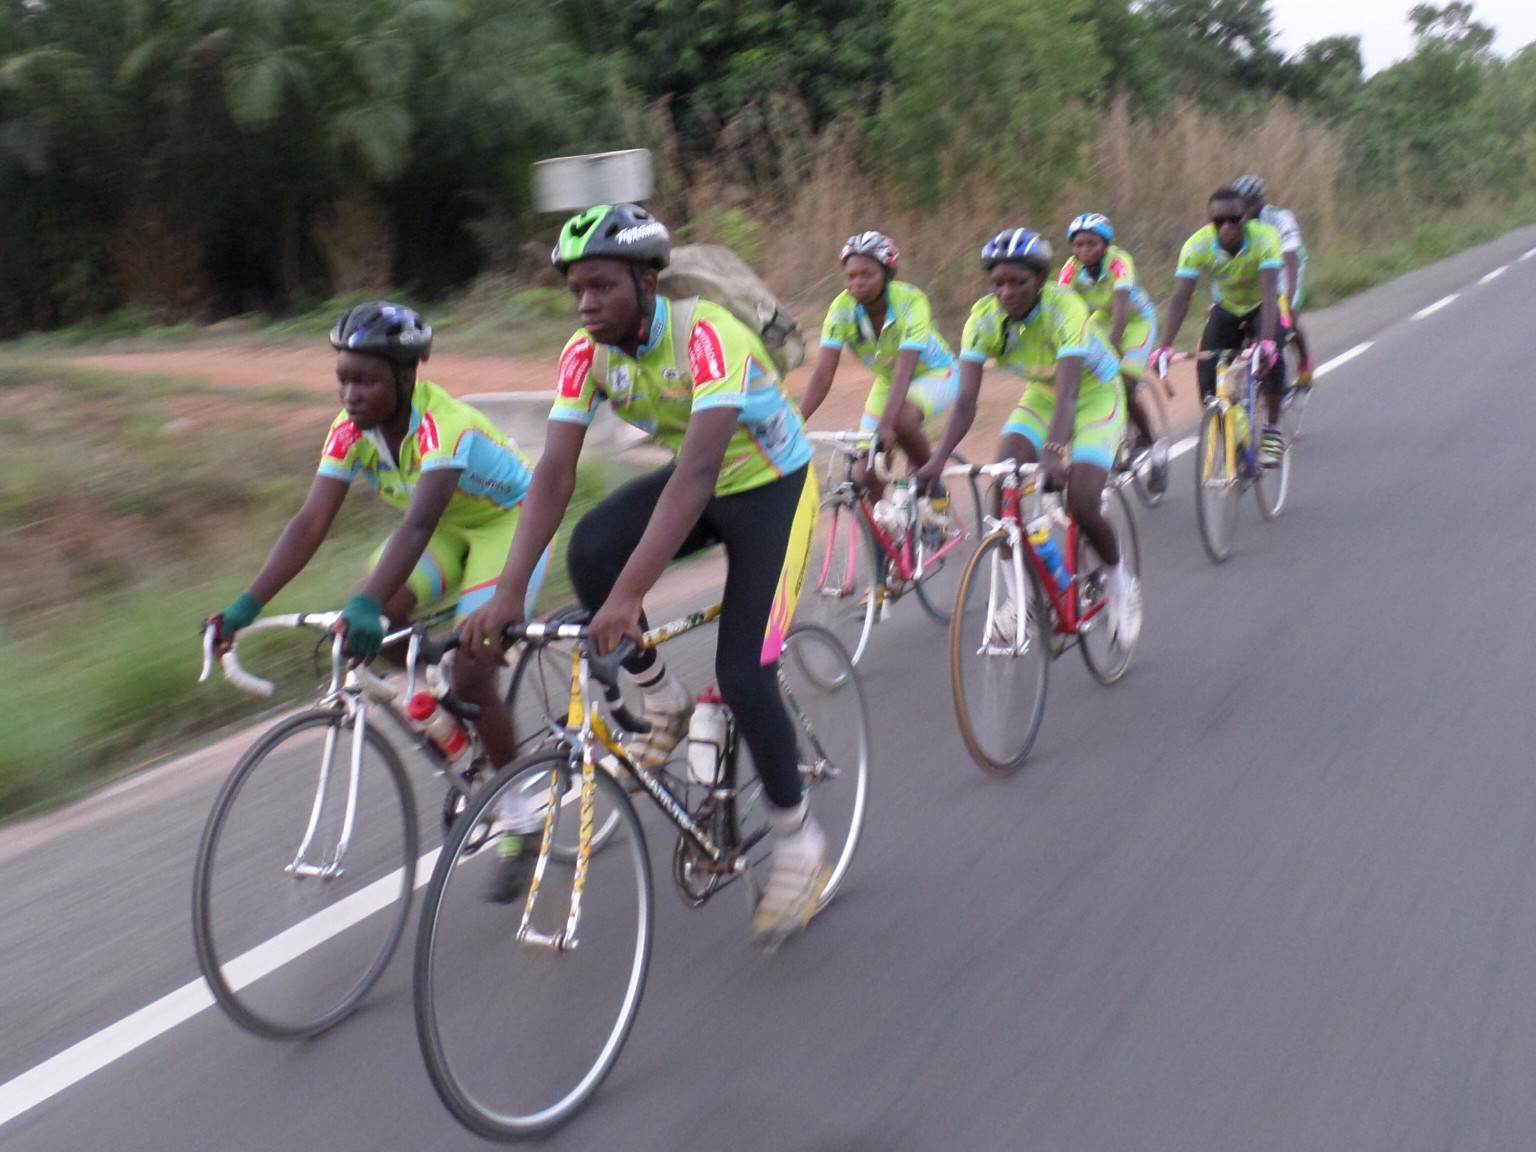 Kpalimé Cycling Project cycling in Togo